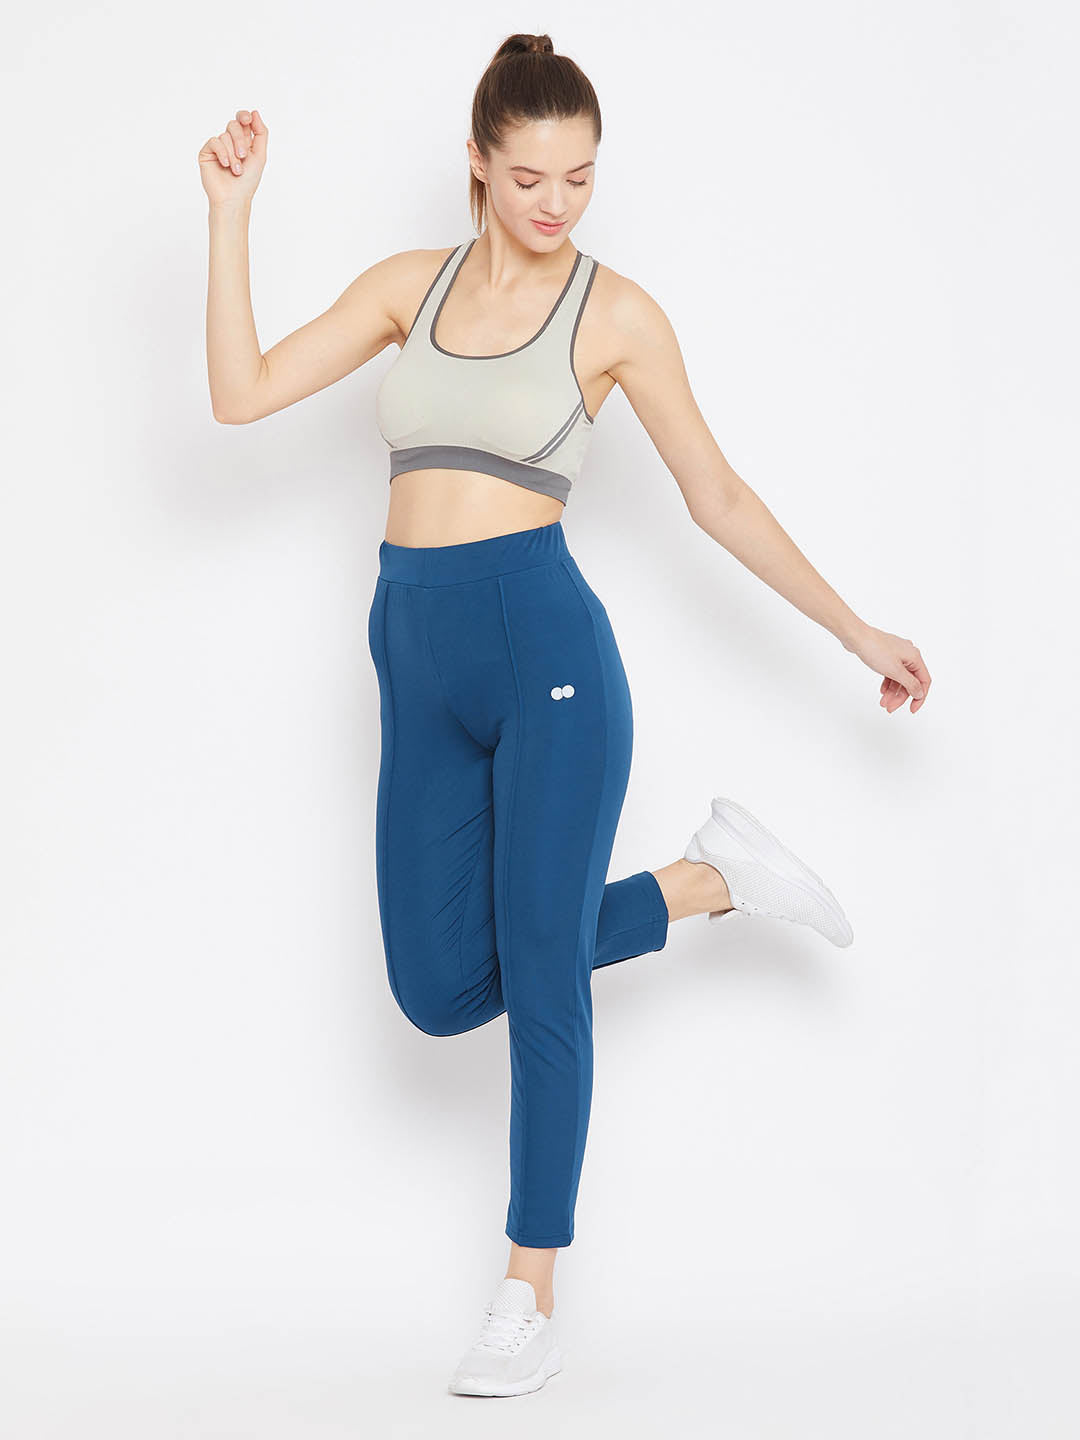 Activewear Ankle Length Tights In Blue